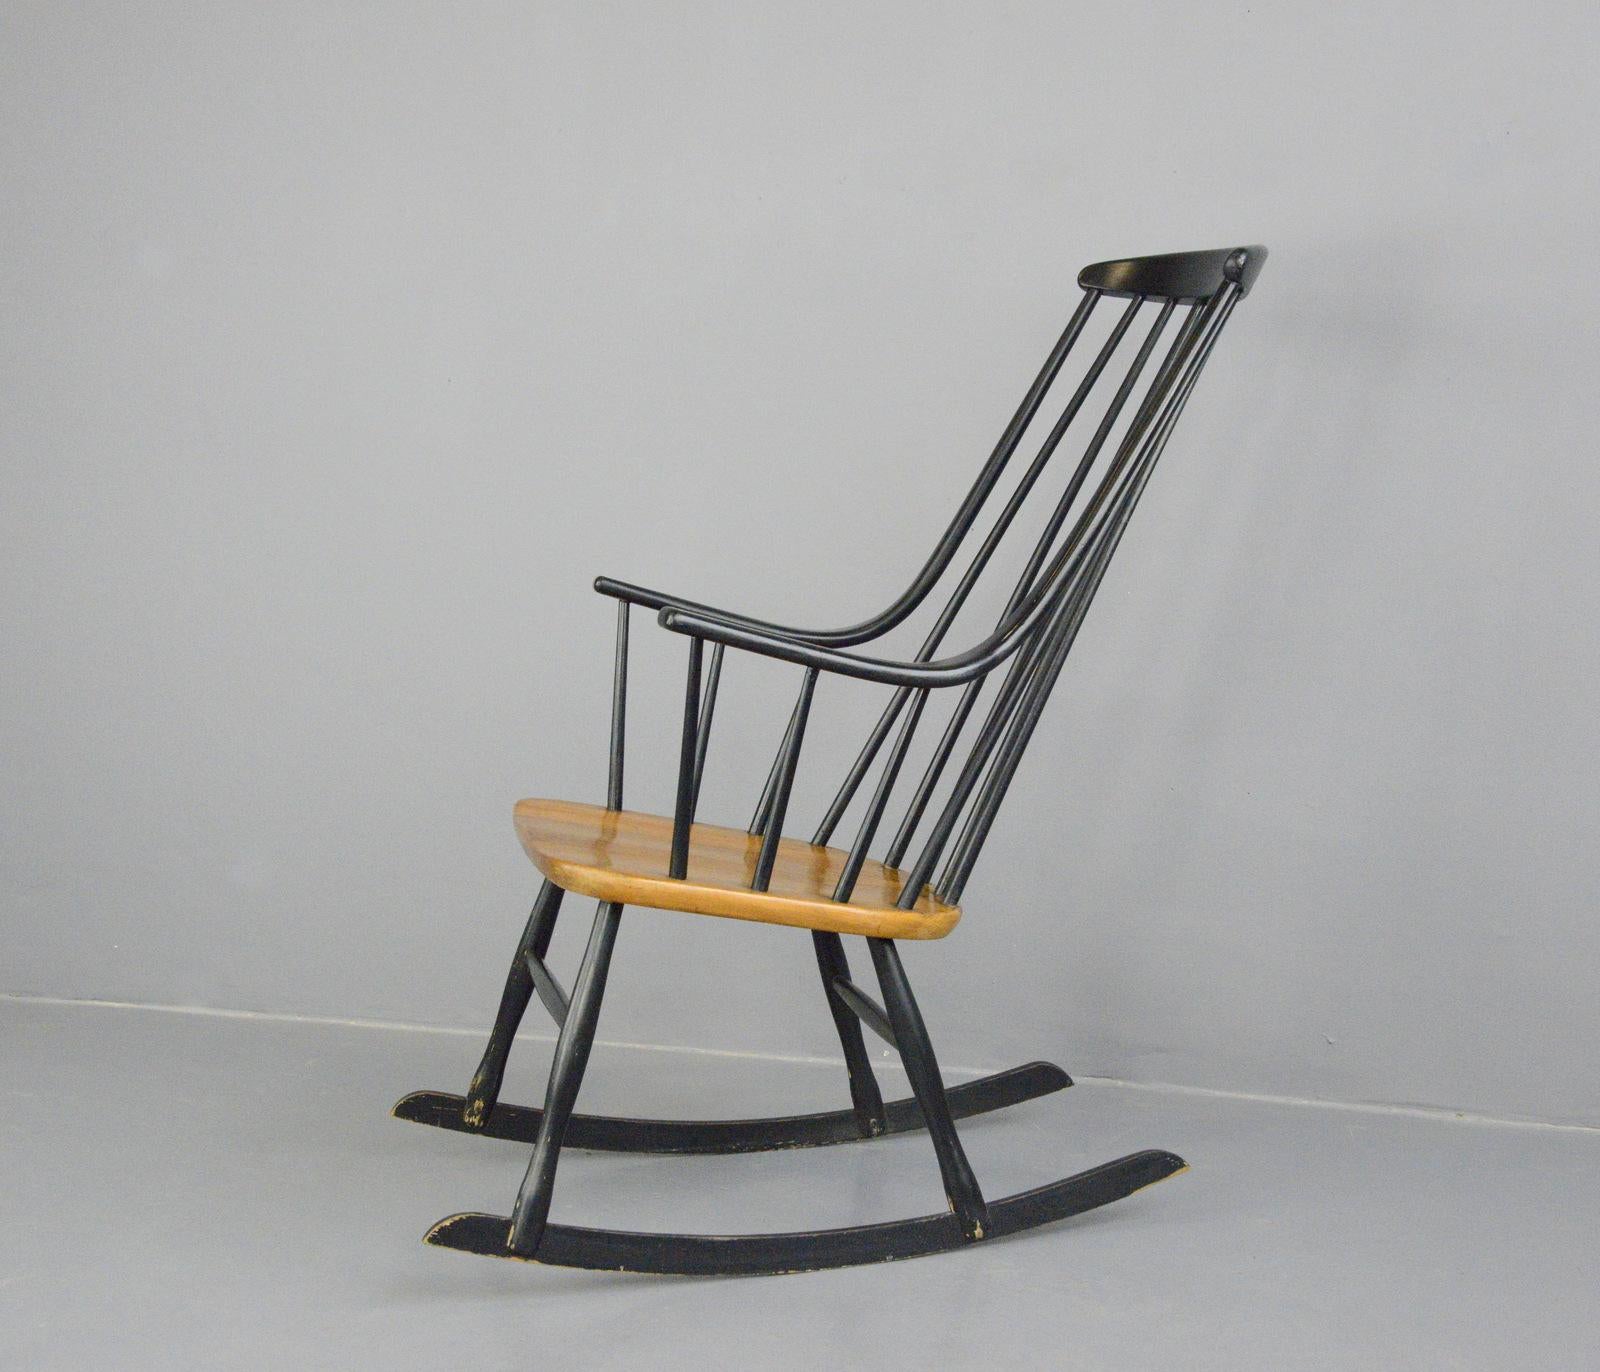 Midcentury rocking chair by Ilmari Tapiovaara

- Solid beech seat and frame
- By Ilmari Tapiovaara
- Finnish, 1960s
- Measures: 56cm wide x 72cm deep x 106cm tall
- 47cm seat height

Condition report

All joints have been glued and the